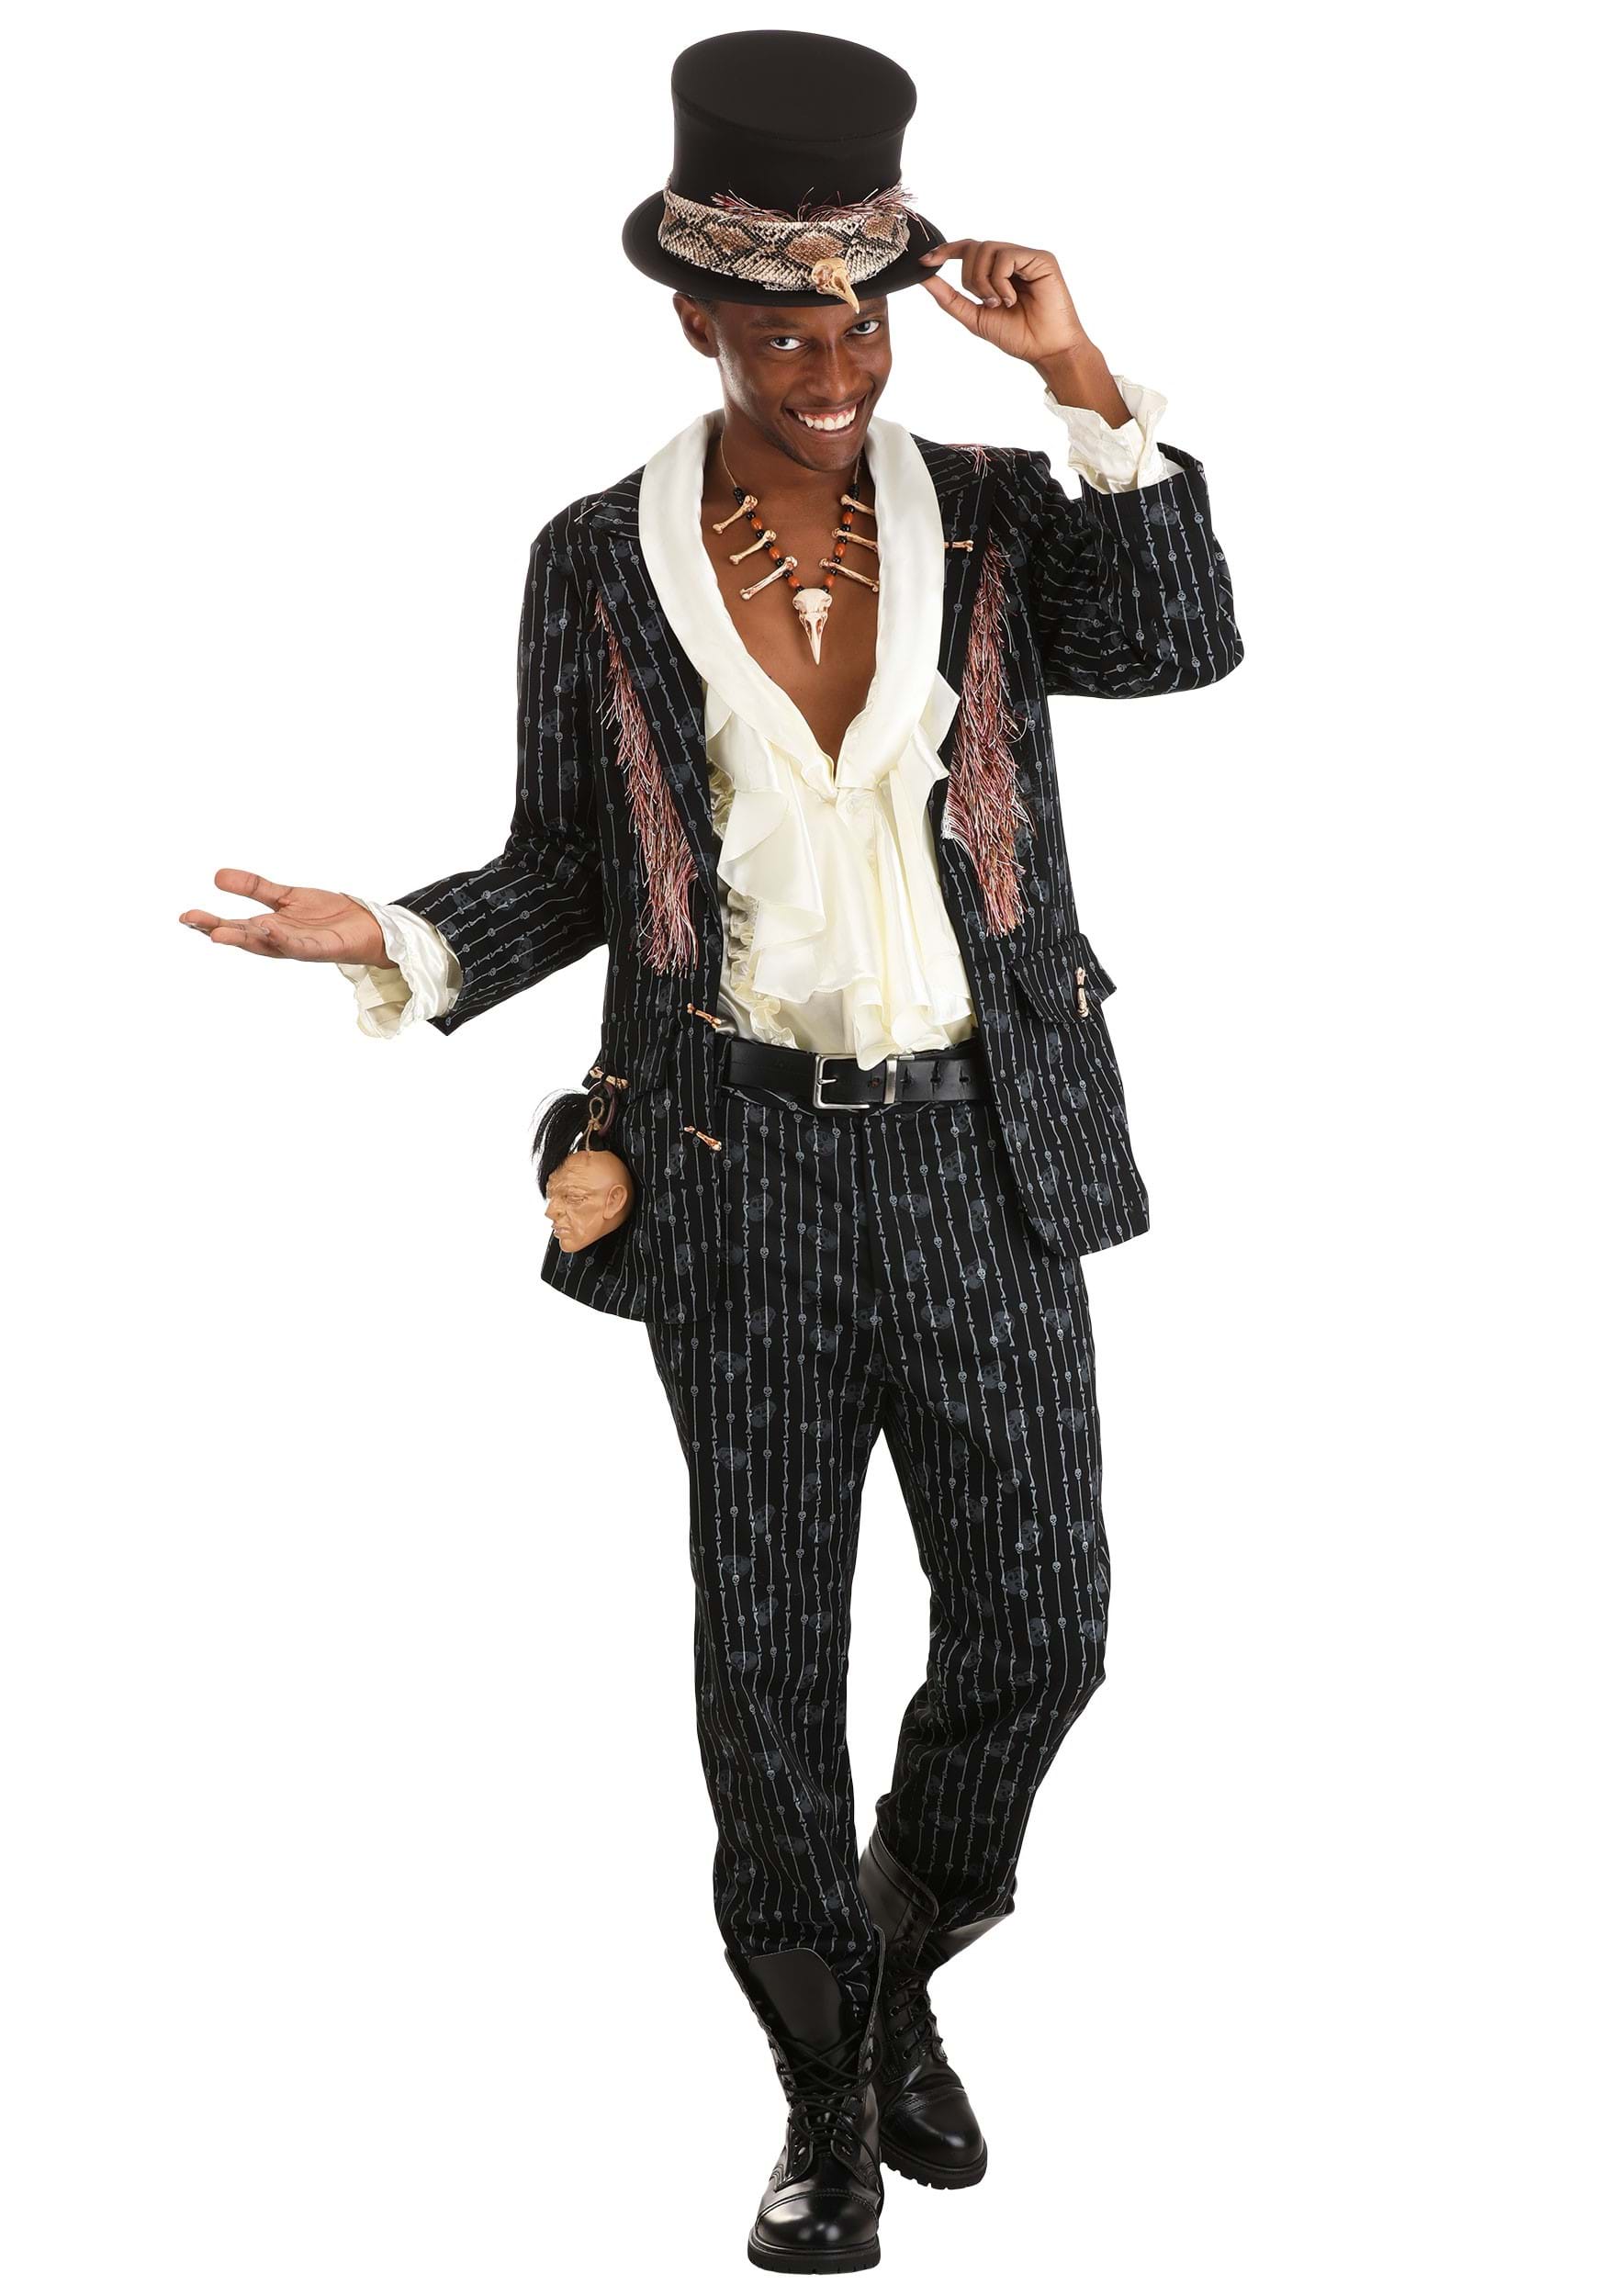 Witch Doctor Men's Costume